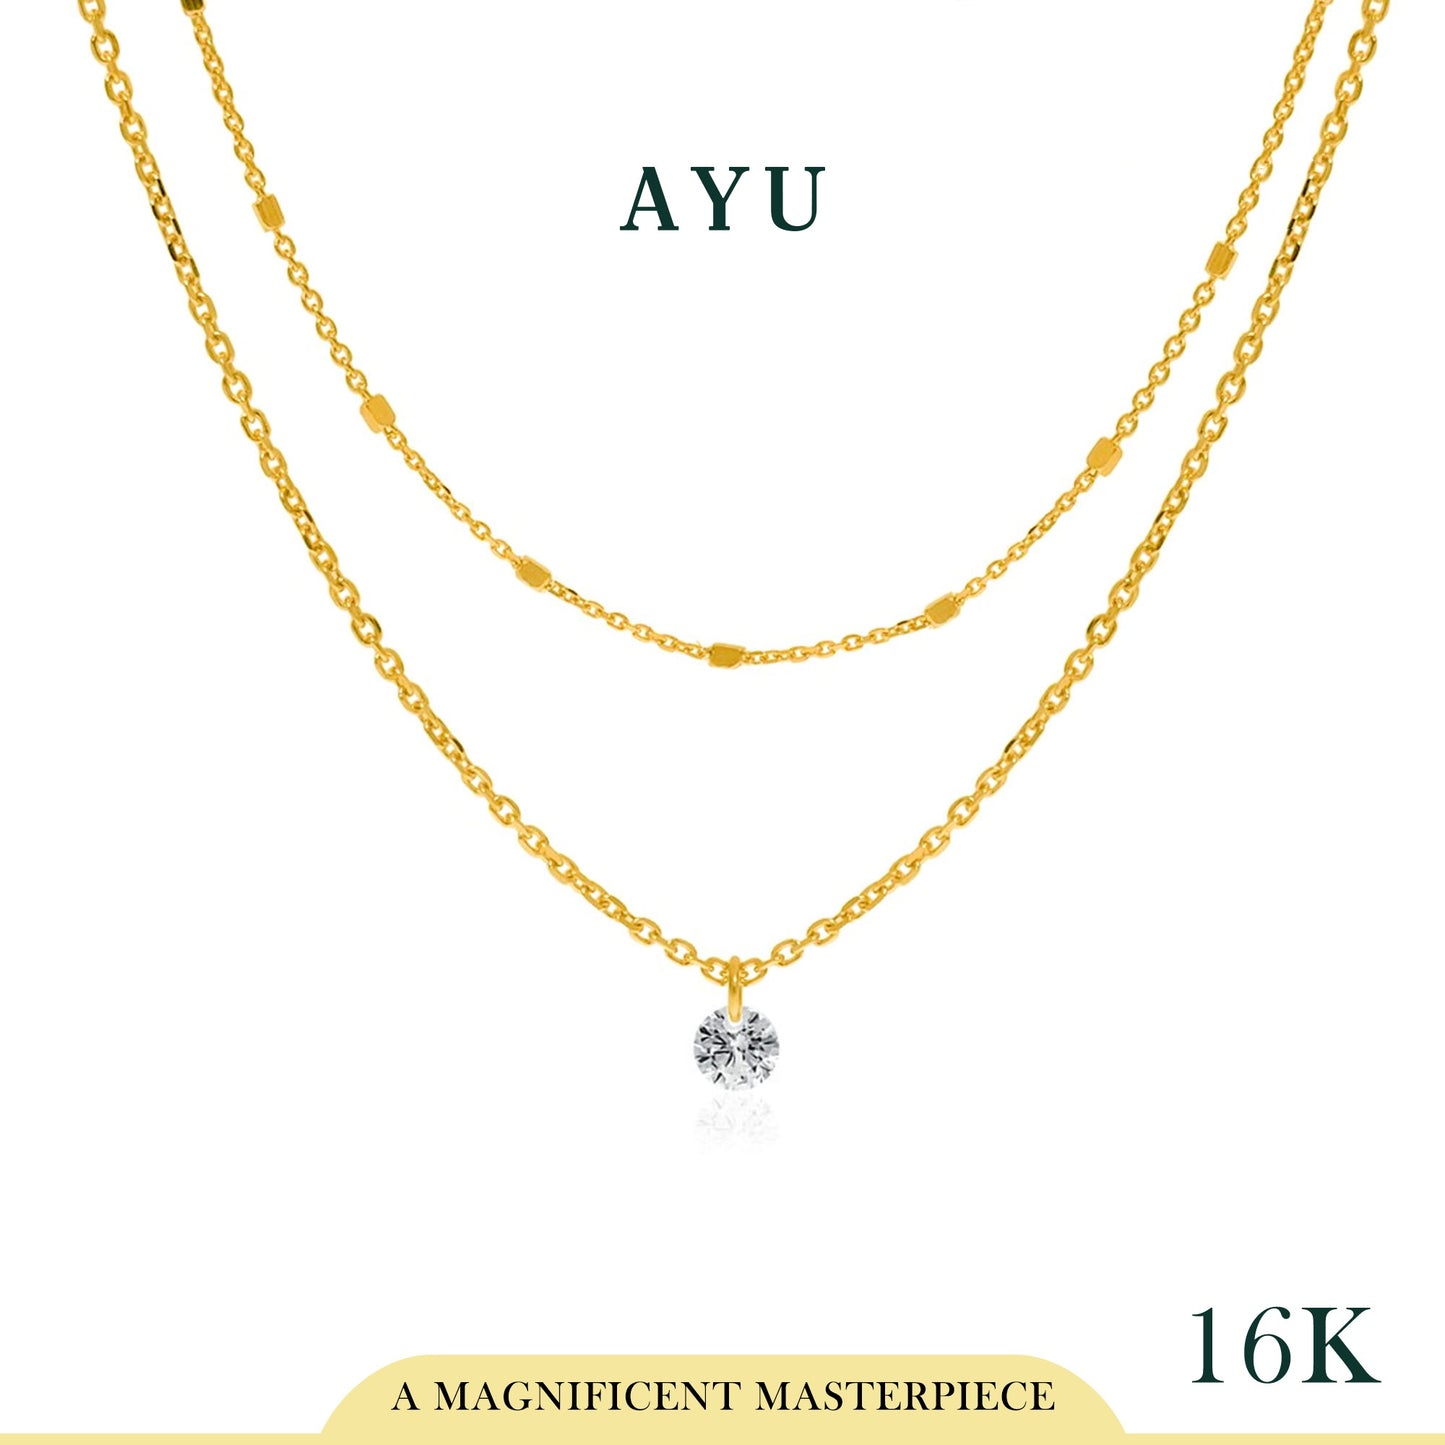 AYU CANDY POP DOUBLE CHAIN NECKLACE 16K YELLOW GOLD